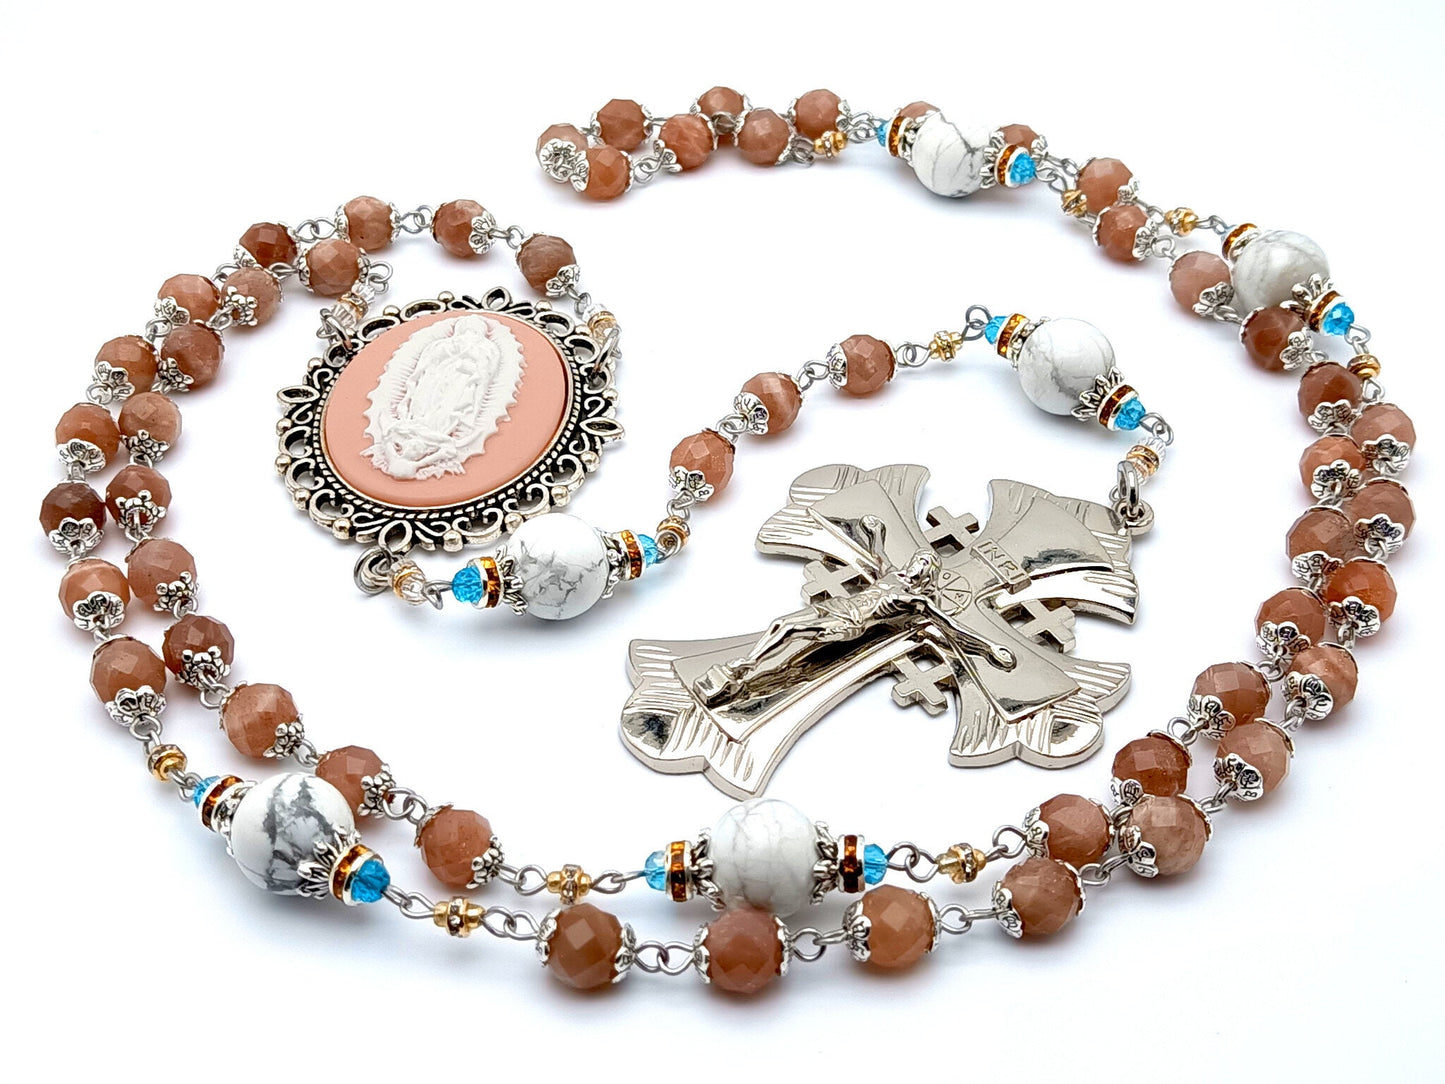 Our Lady of Guadalupe cameo unique rosary beads with faceted moonstone gemstone and howlite marbled beads and large silver crucifix.